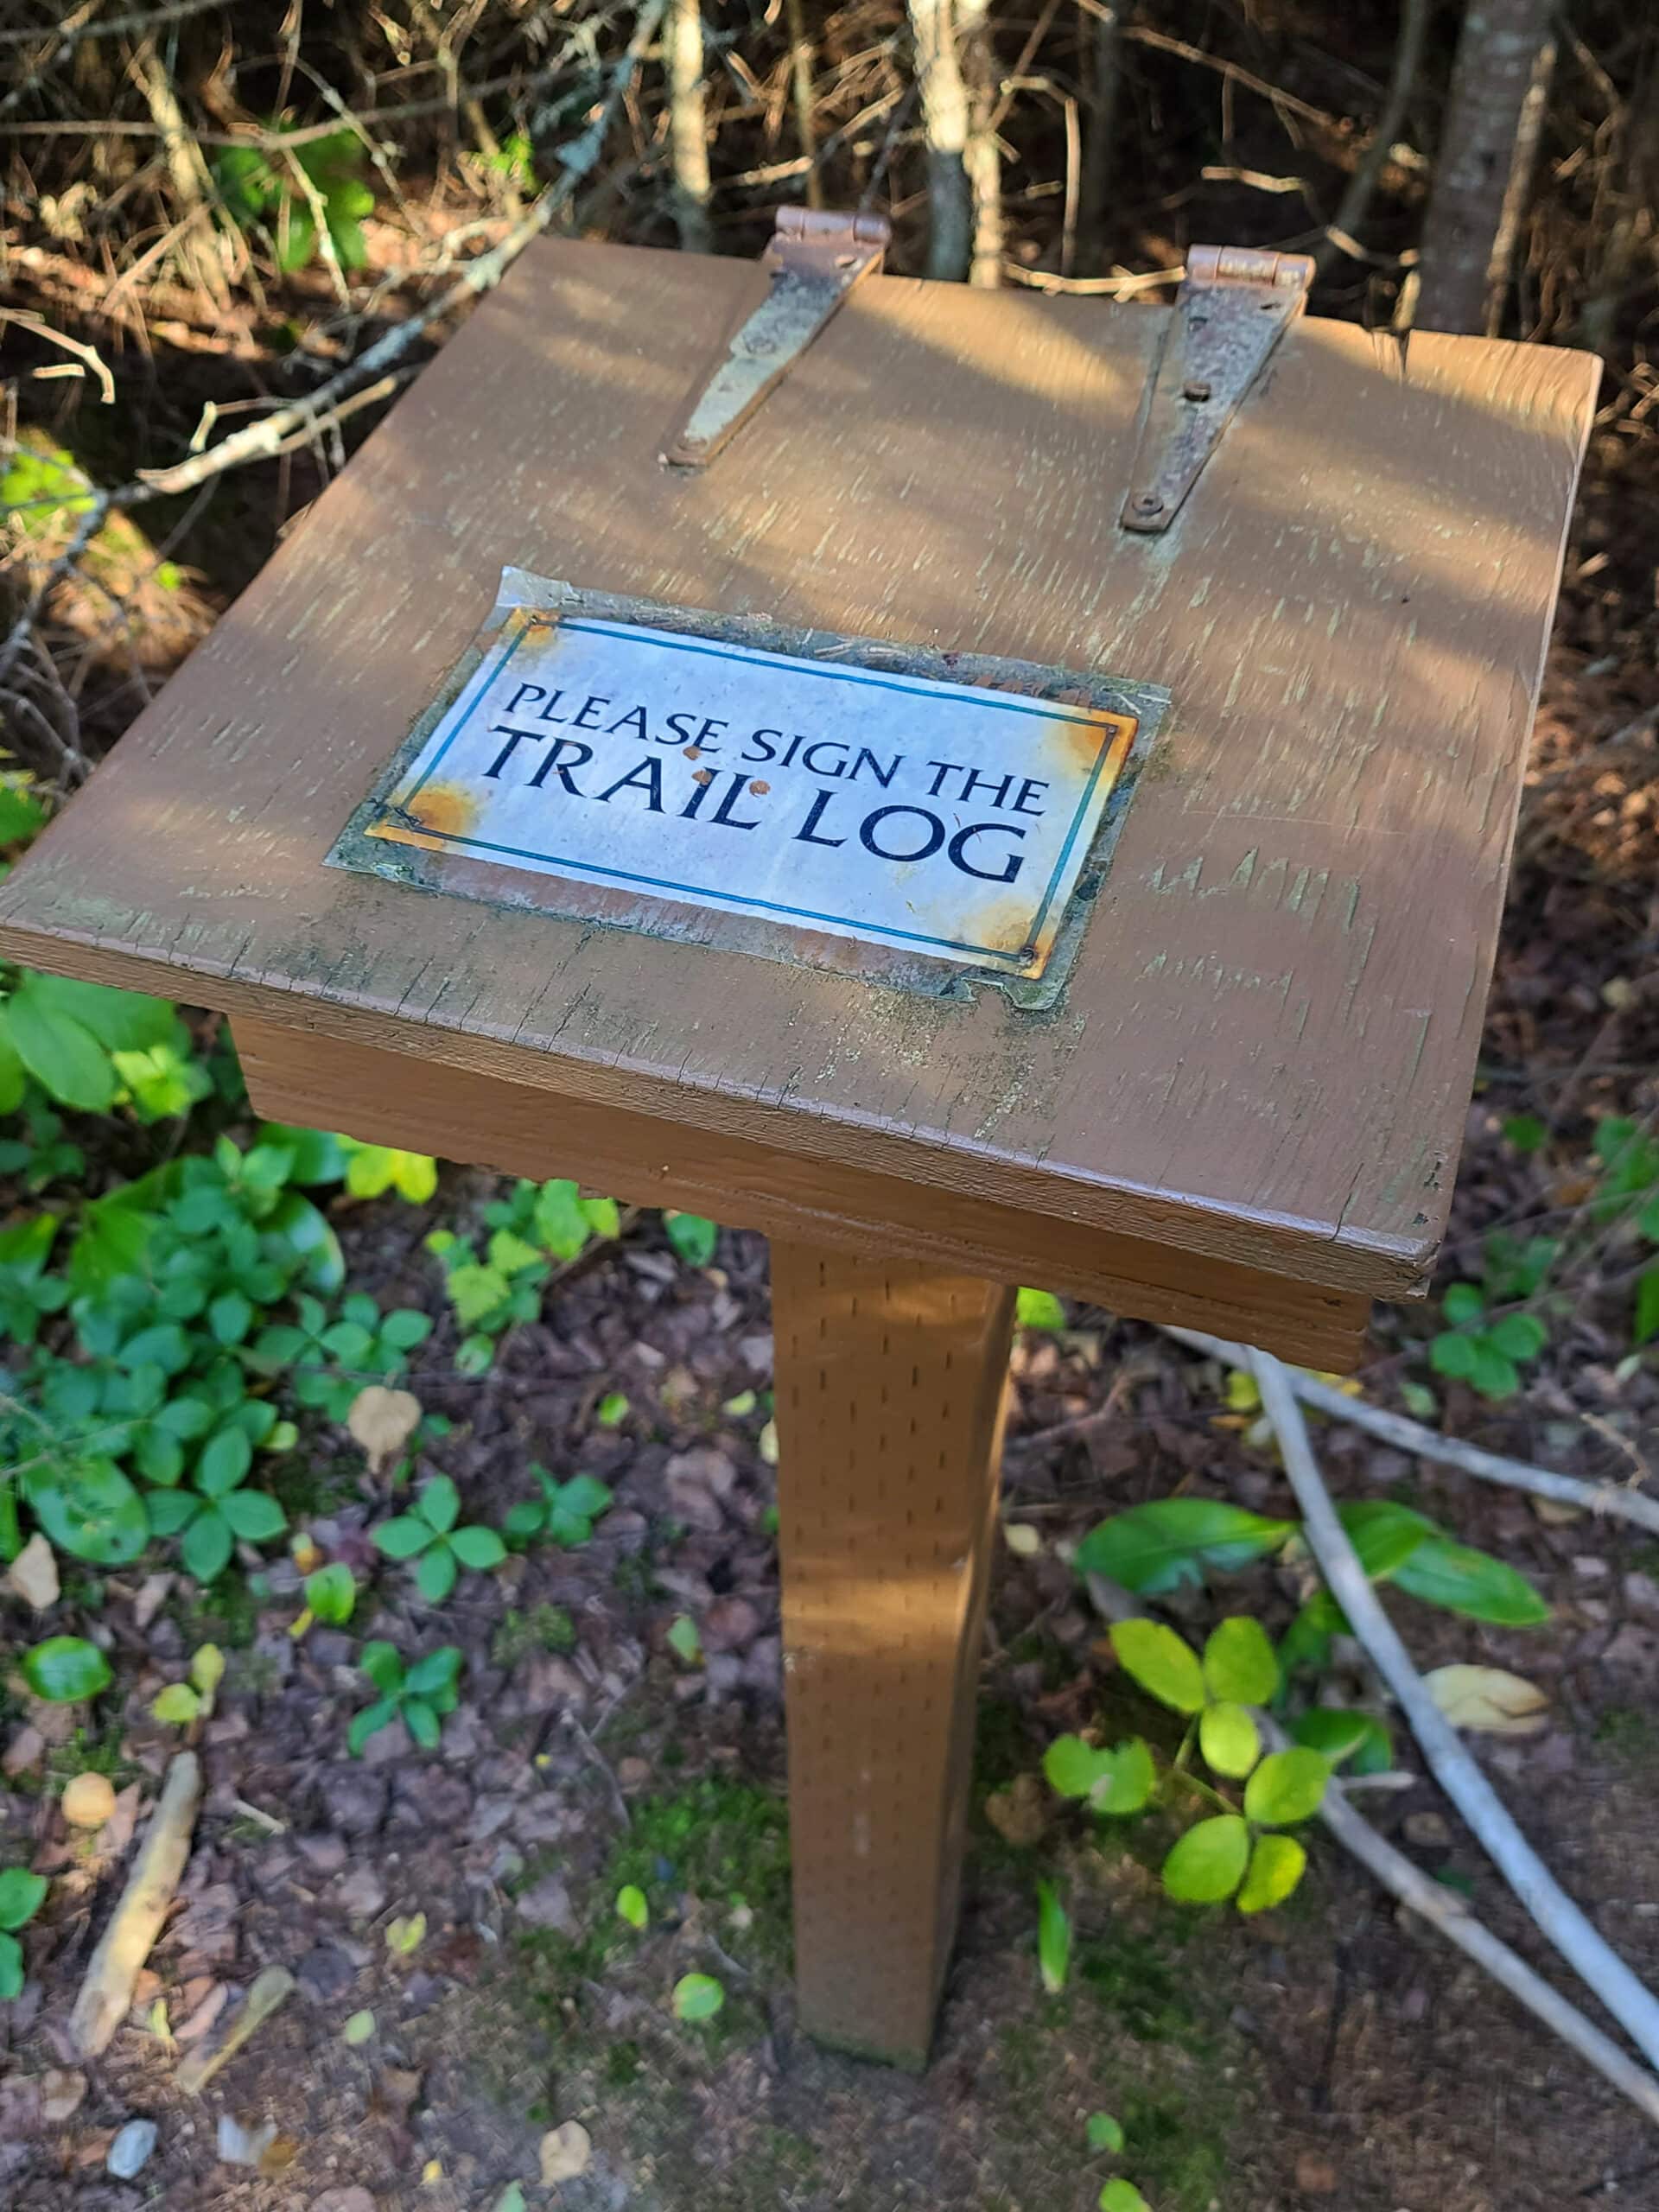 A wooden pedestal with a label asking hikers to please sign the trail log.